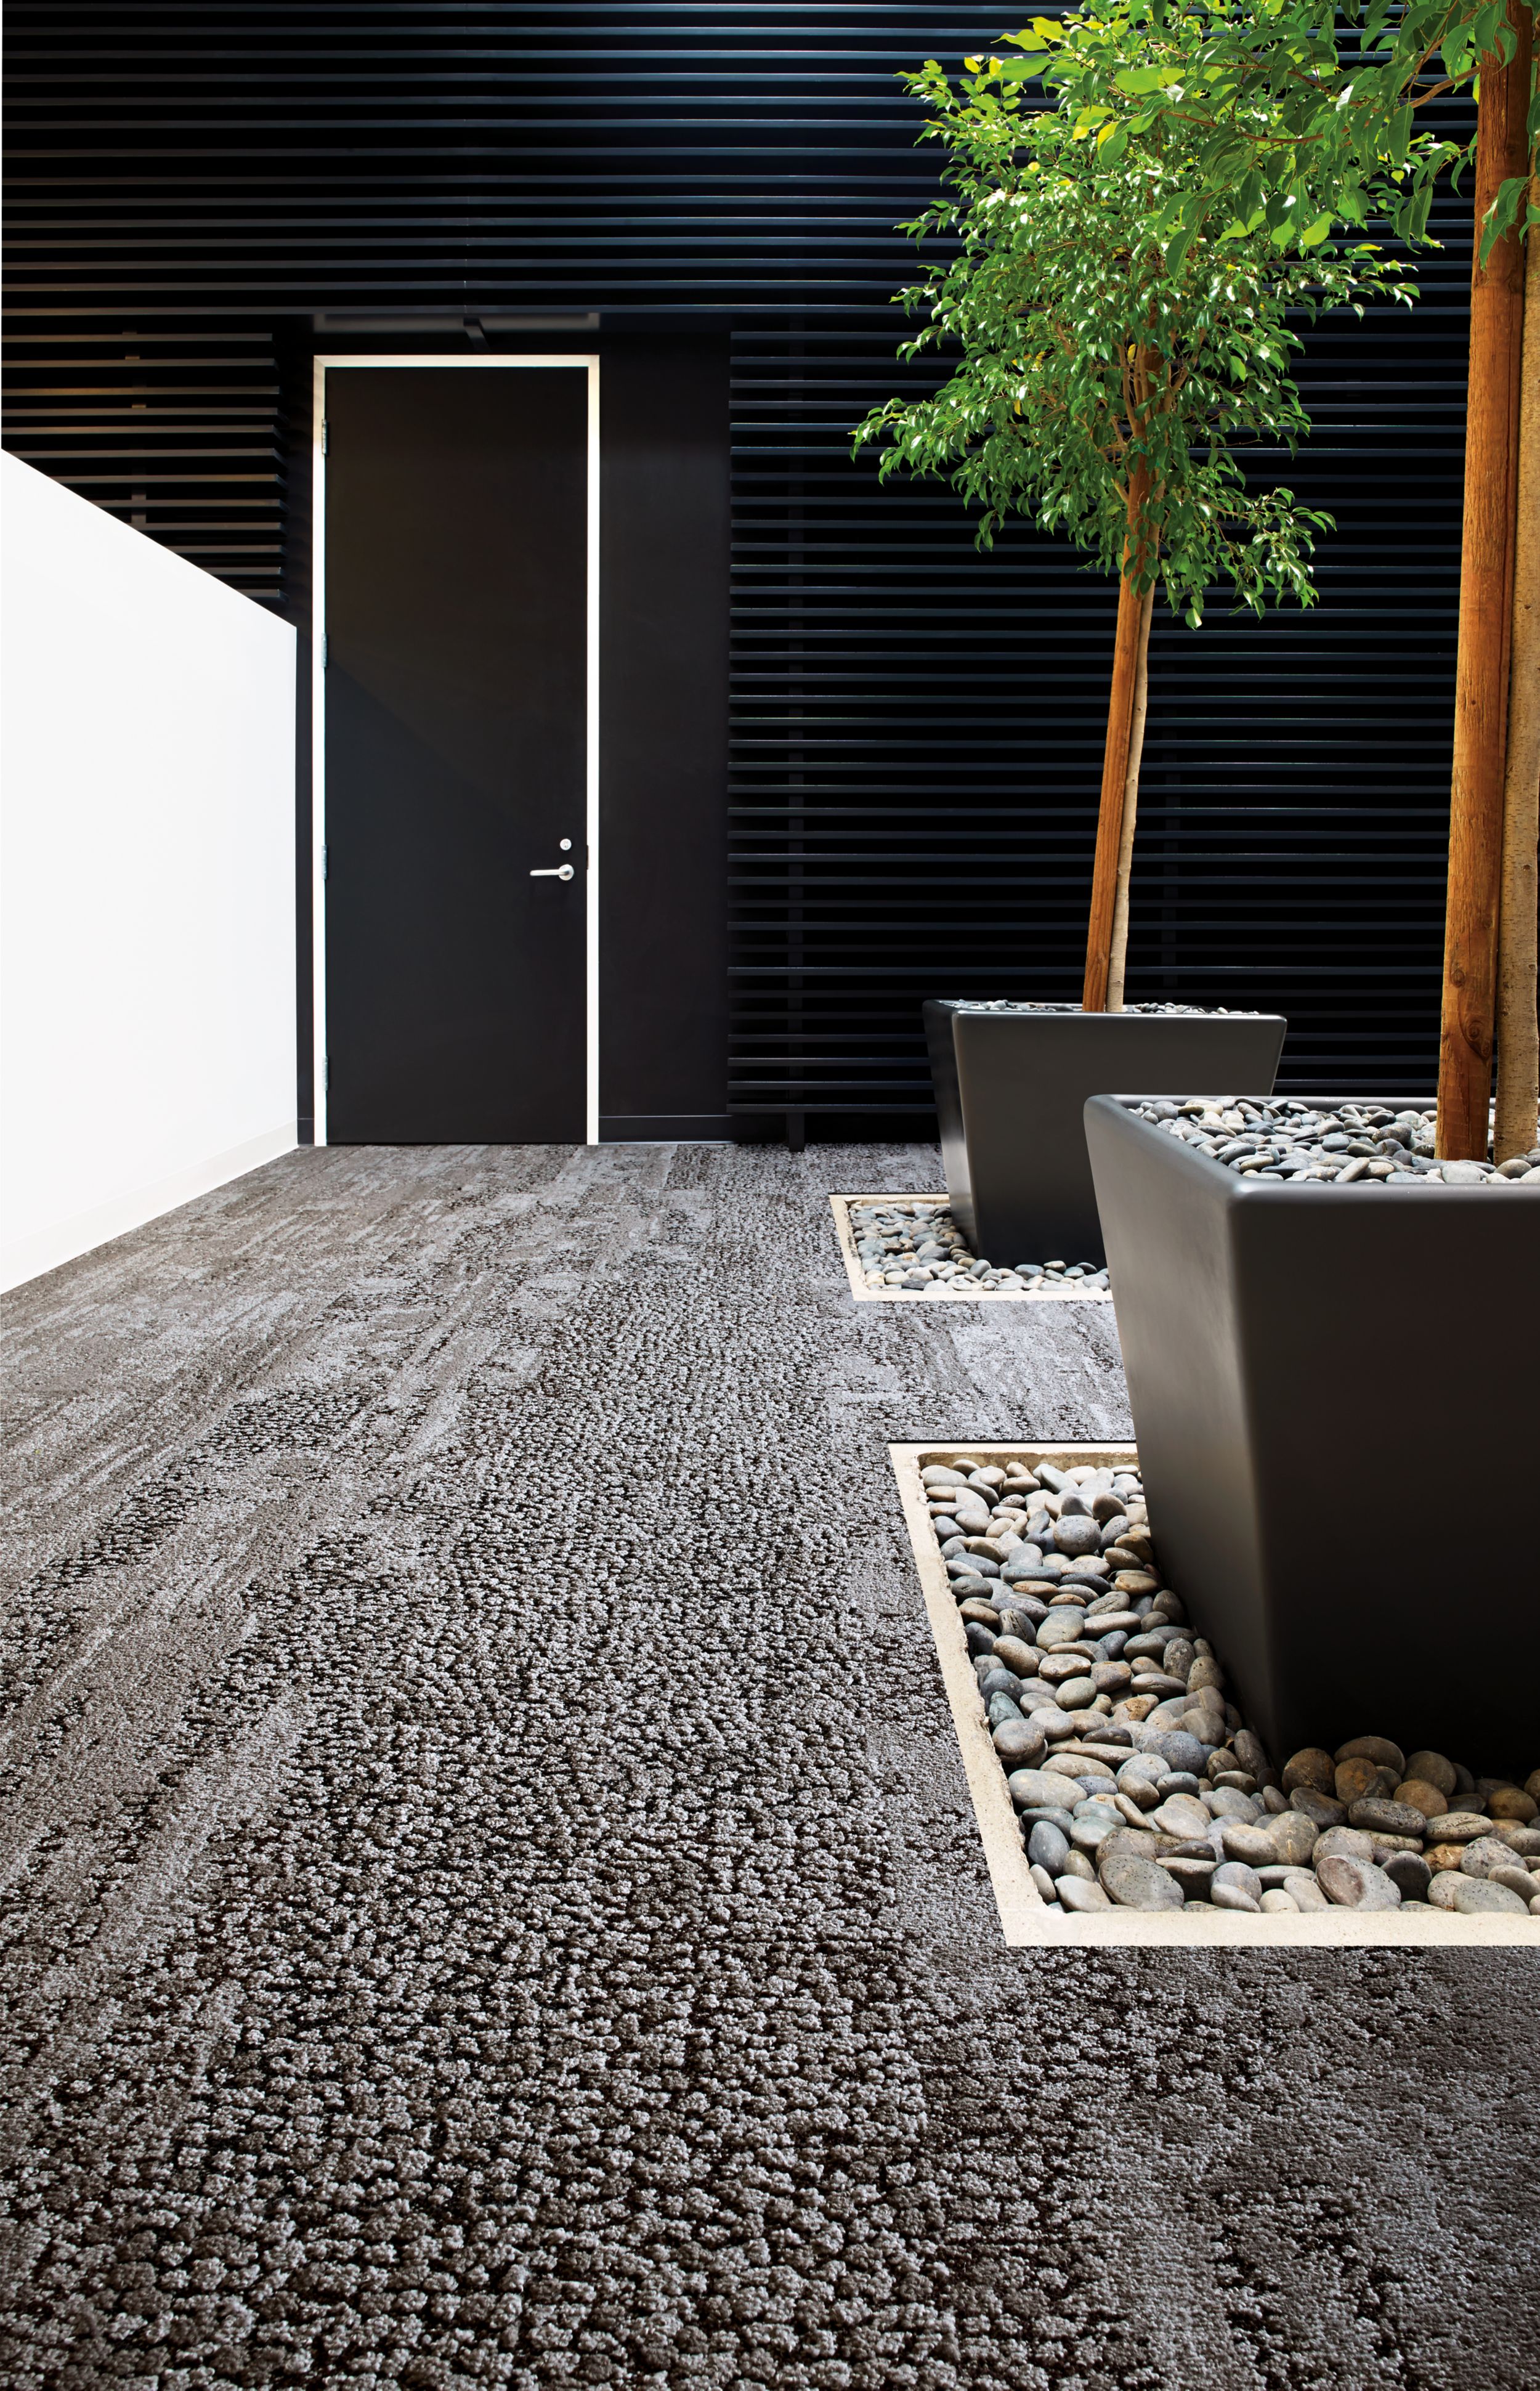 Interface HN810, HN820, HN840 and HN850 plank carpet tiles in white anc black room with potted trees and river rock Bildnummer 4